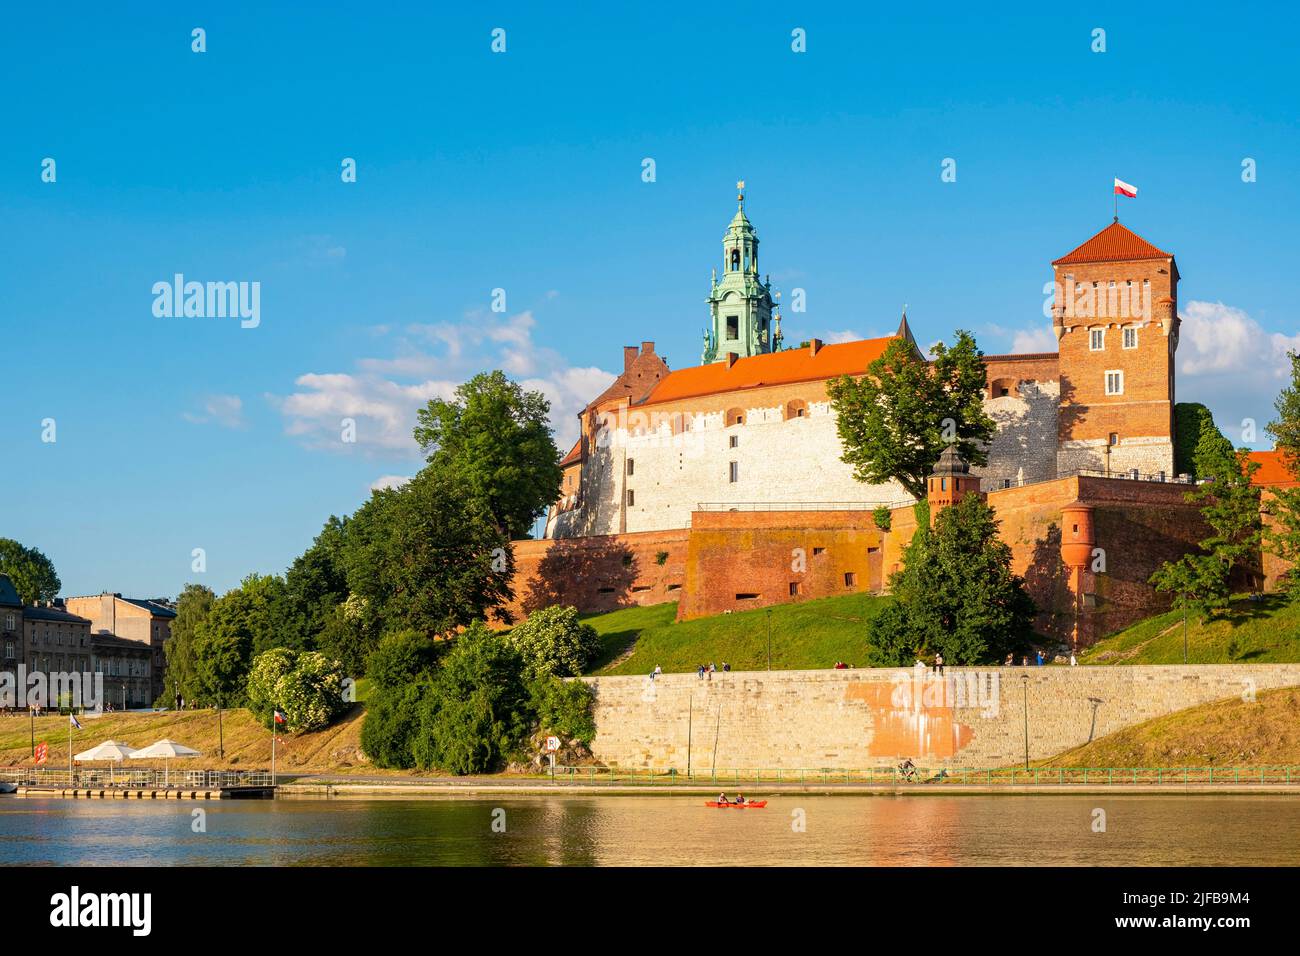 Poland, Lesser Poland, Krakow, listed as World Heritage by UNESCO, Royal Hill, Wawel Castle on the banks of the Vistula river Stock Photo